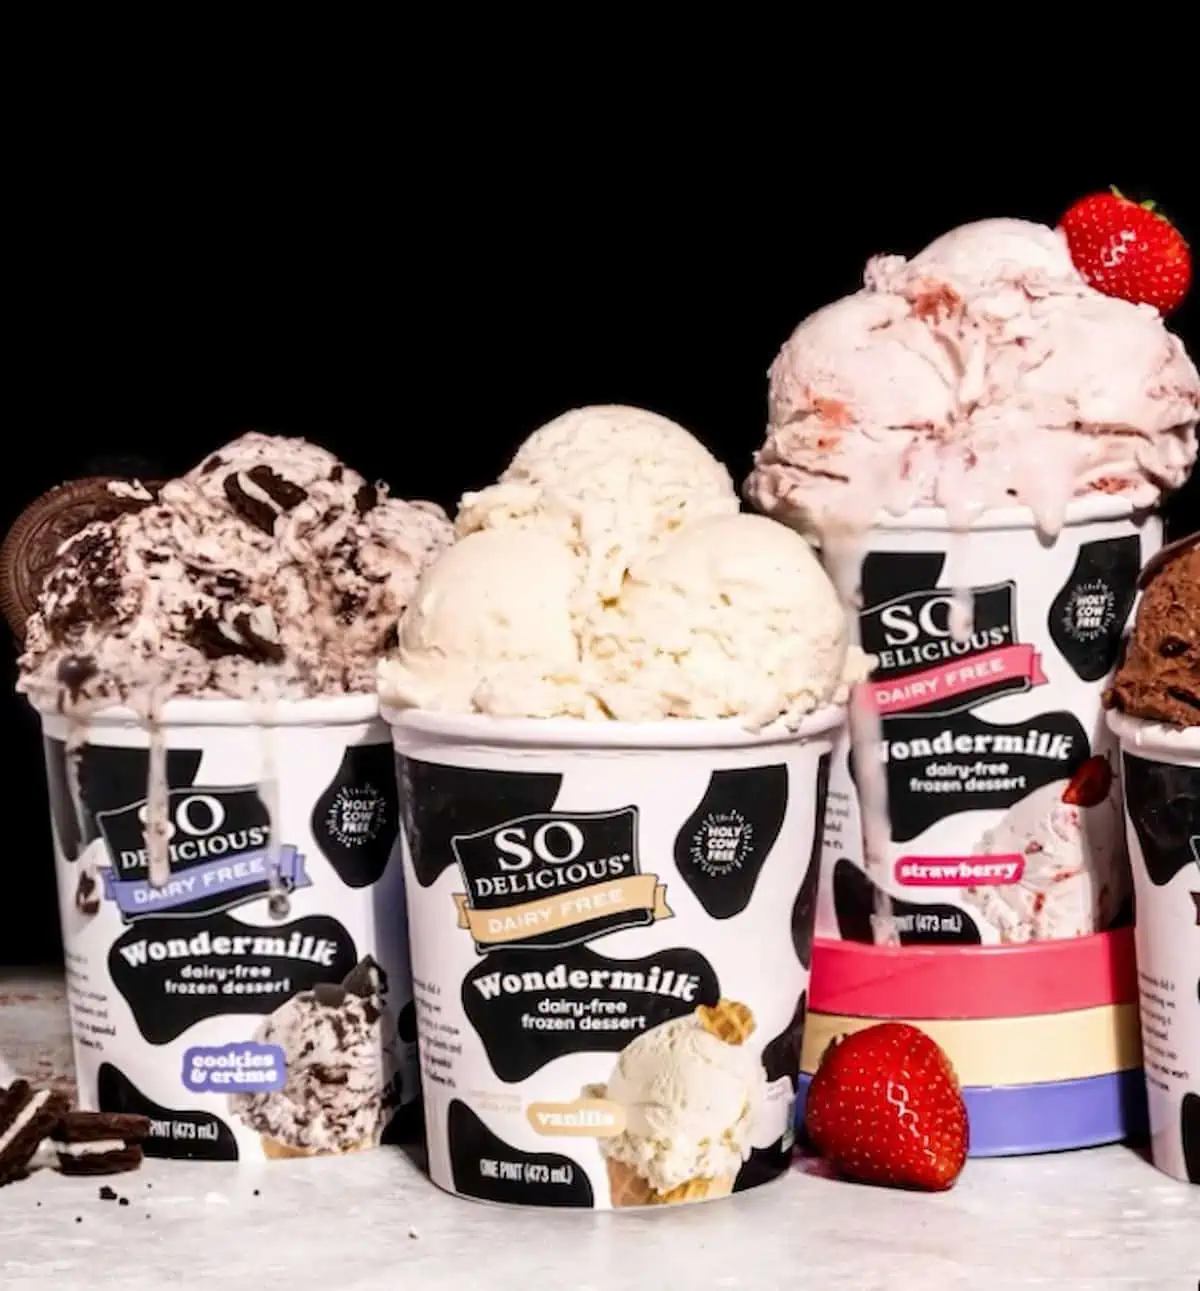 Four pint of So Delicious Wondermilk dairy-free ice cream with scoops dripping over the sides.